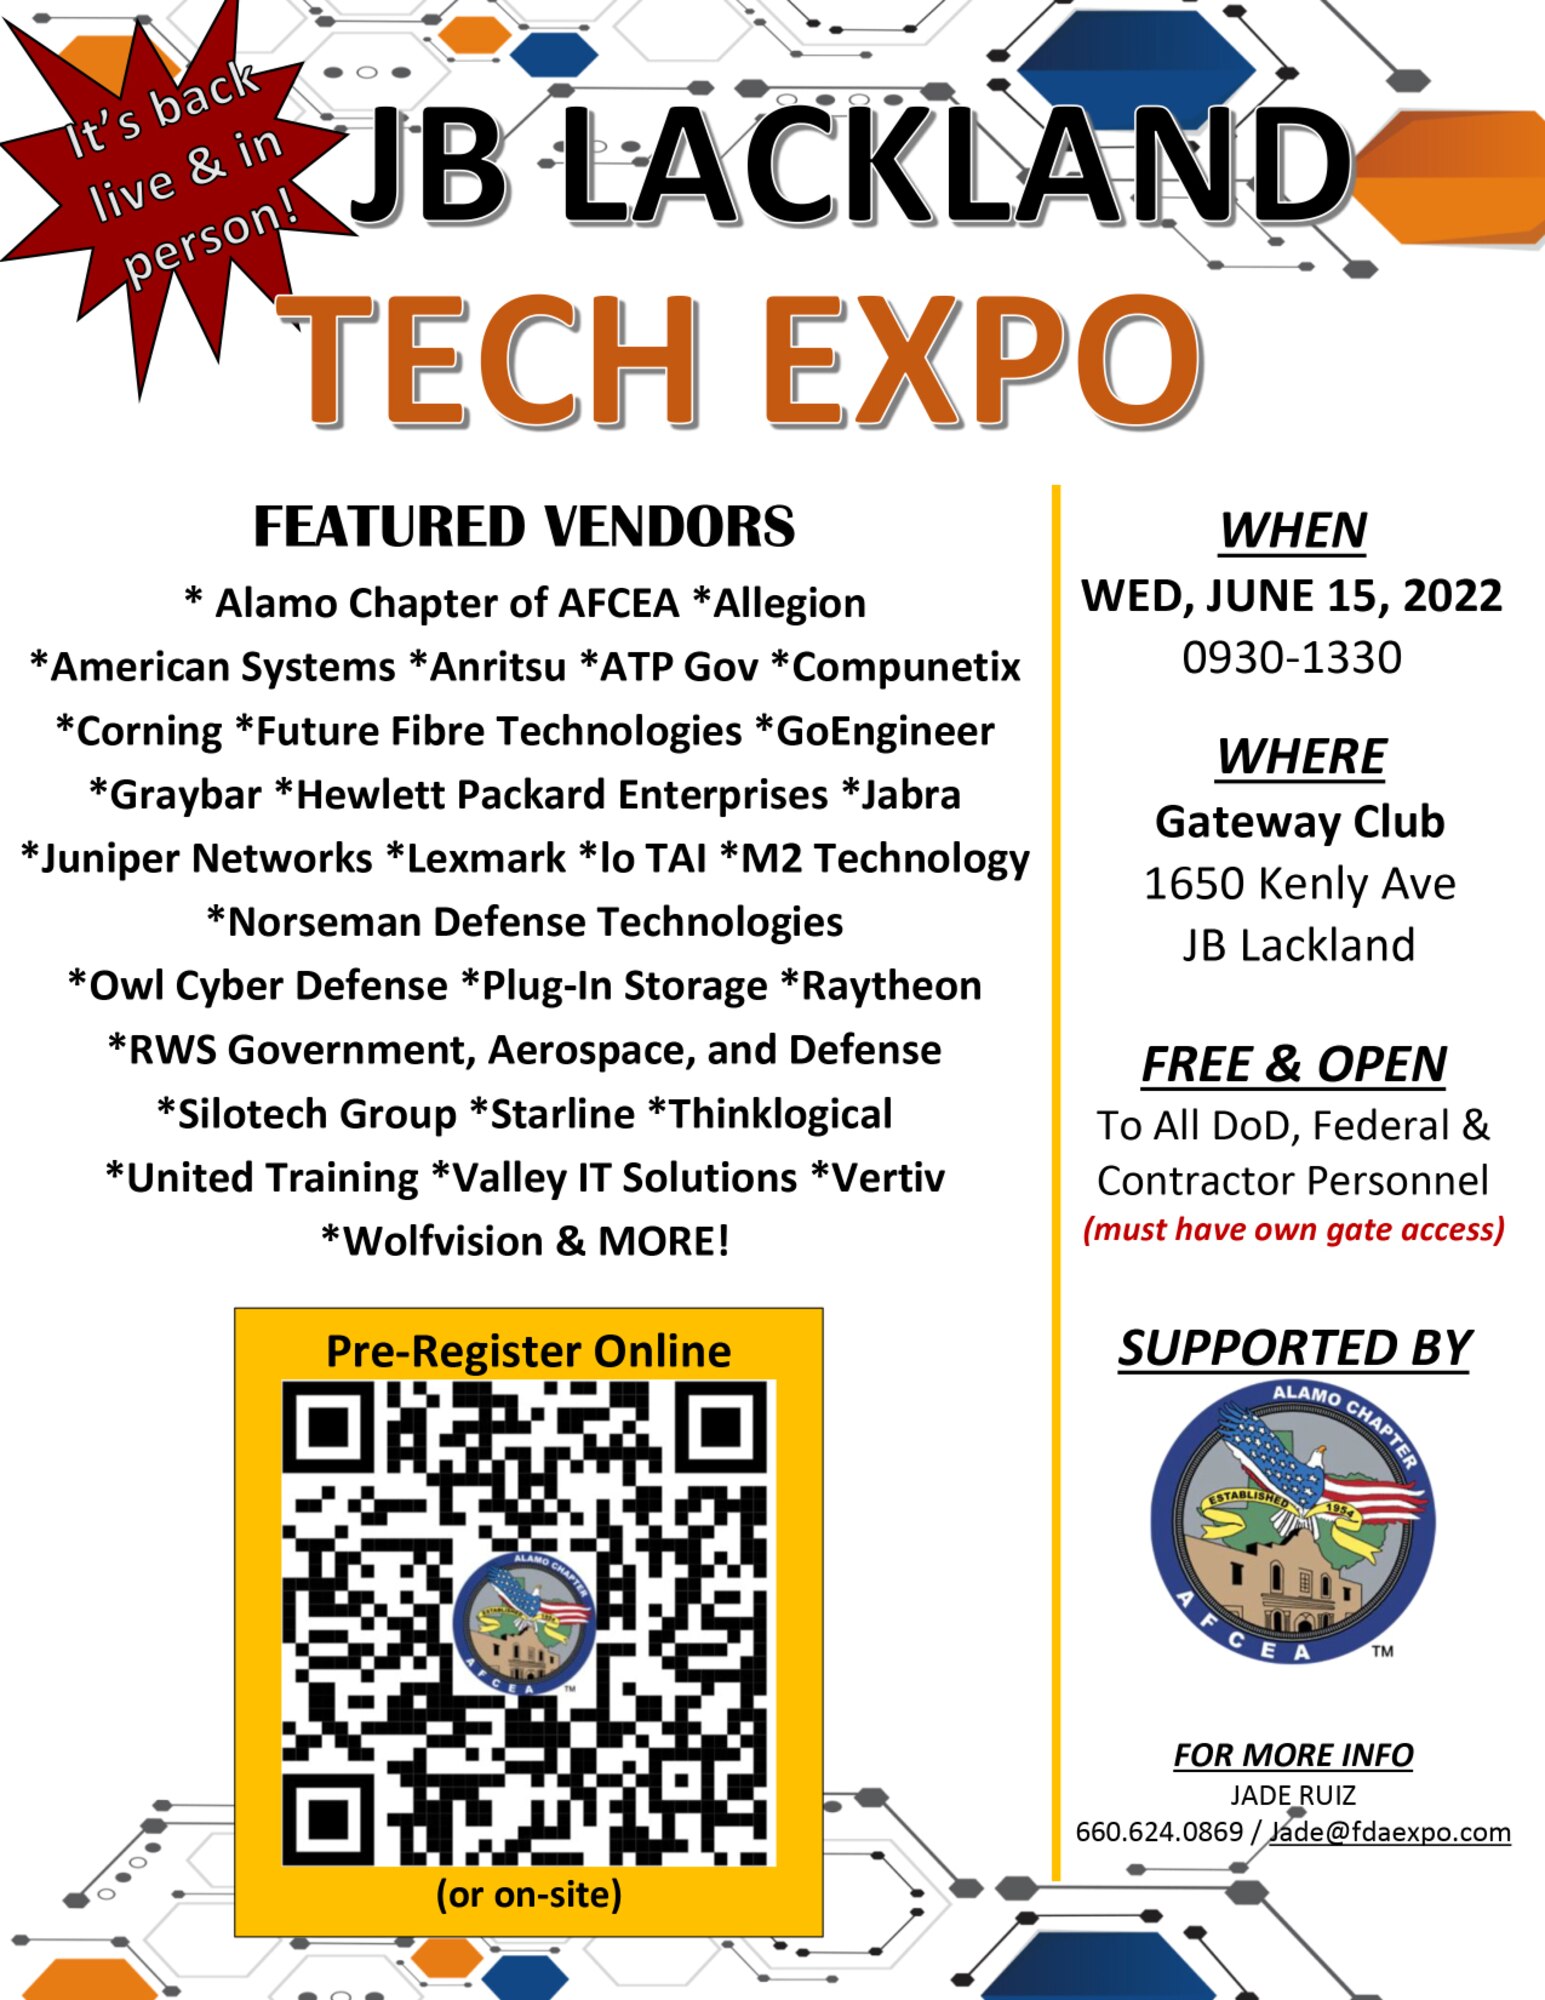 After a three-year absence due to COVID-19, the Joint Base San Antonio Tech Expo returned to the JBSA-Lackland Gateway Club from 9:30 a.m. to 1:30 p.m. June 15.